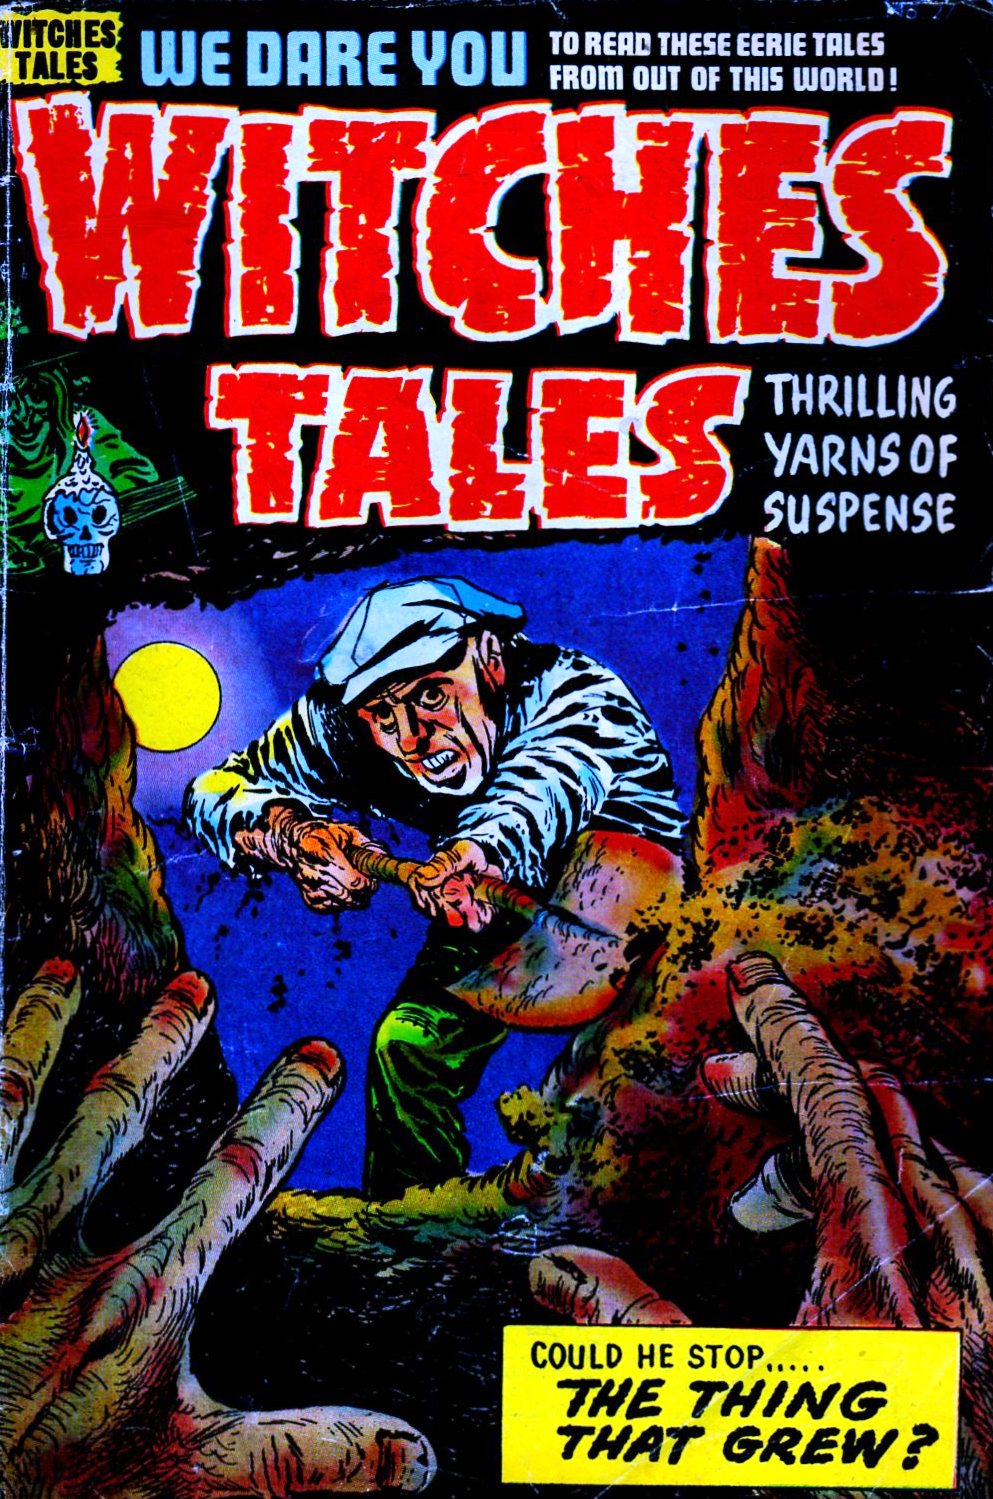 Witches Tales Vol 1 27 | Harvey Comics Database Wiki | Fandom